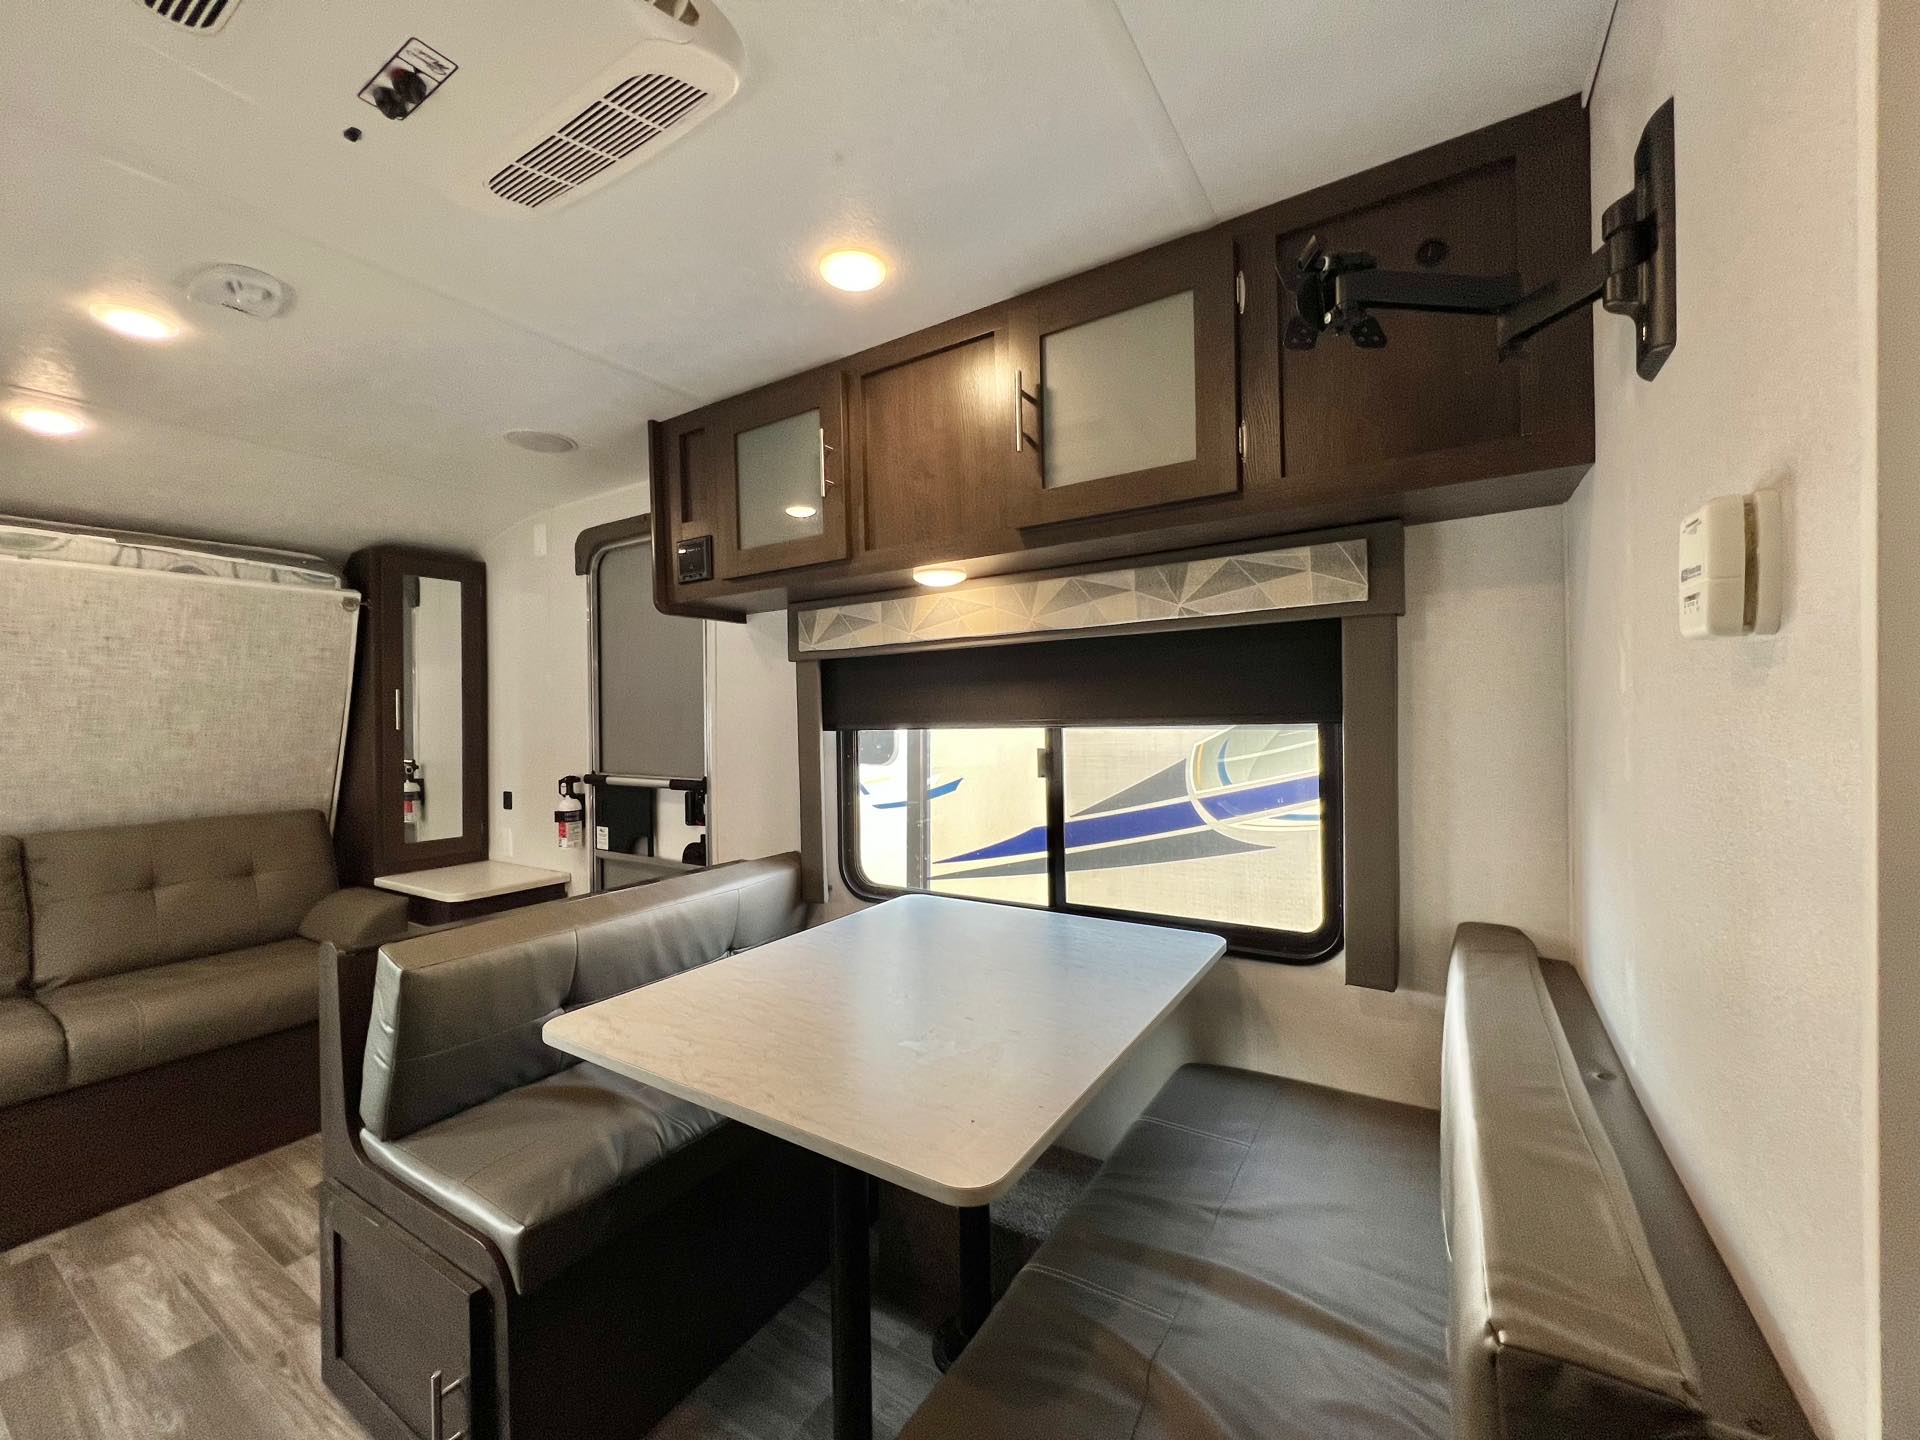 2019 Forest River Salem Cruise Lite 19DBXL at Lee's Country RV